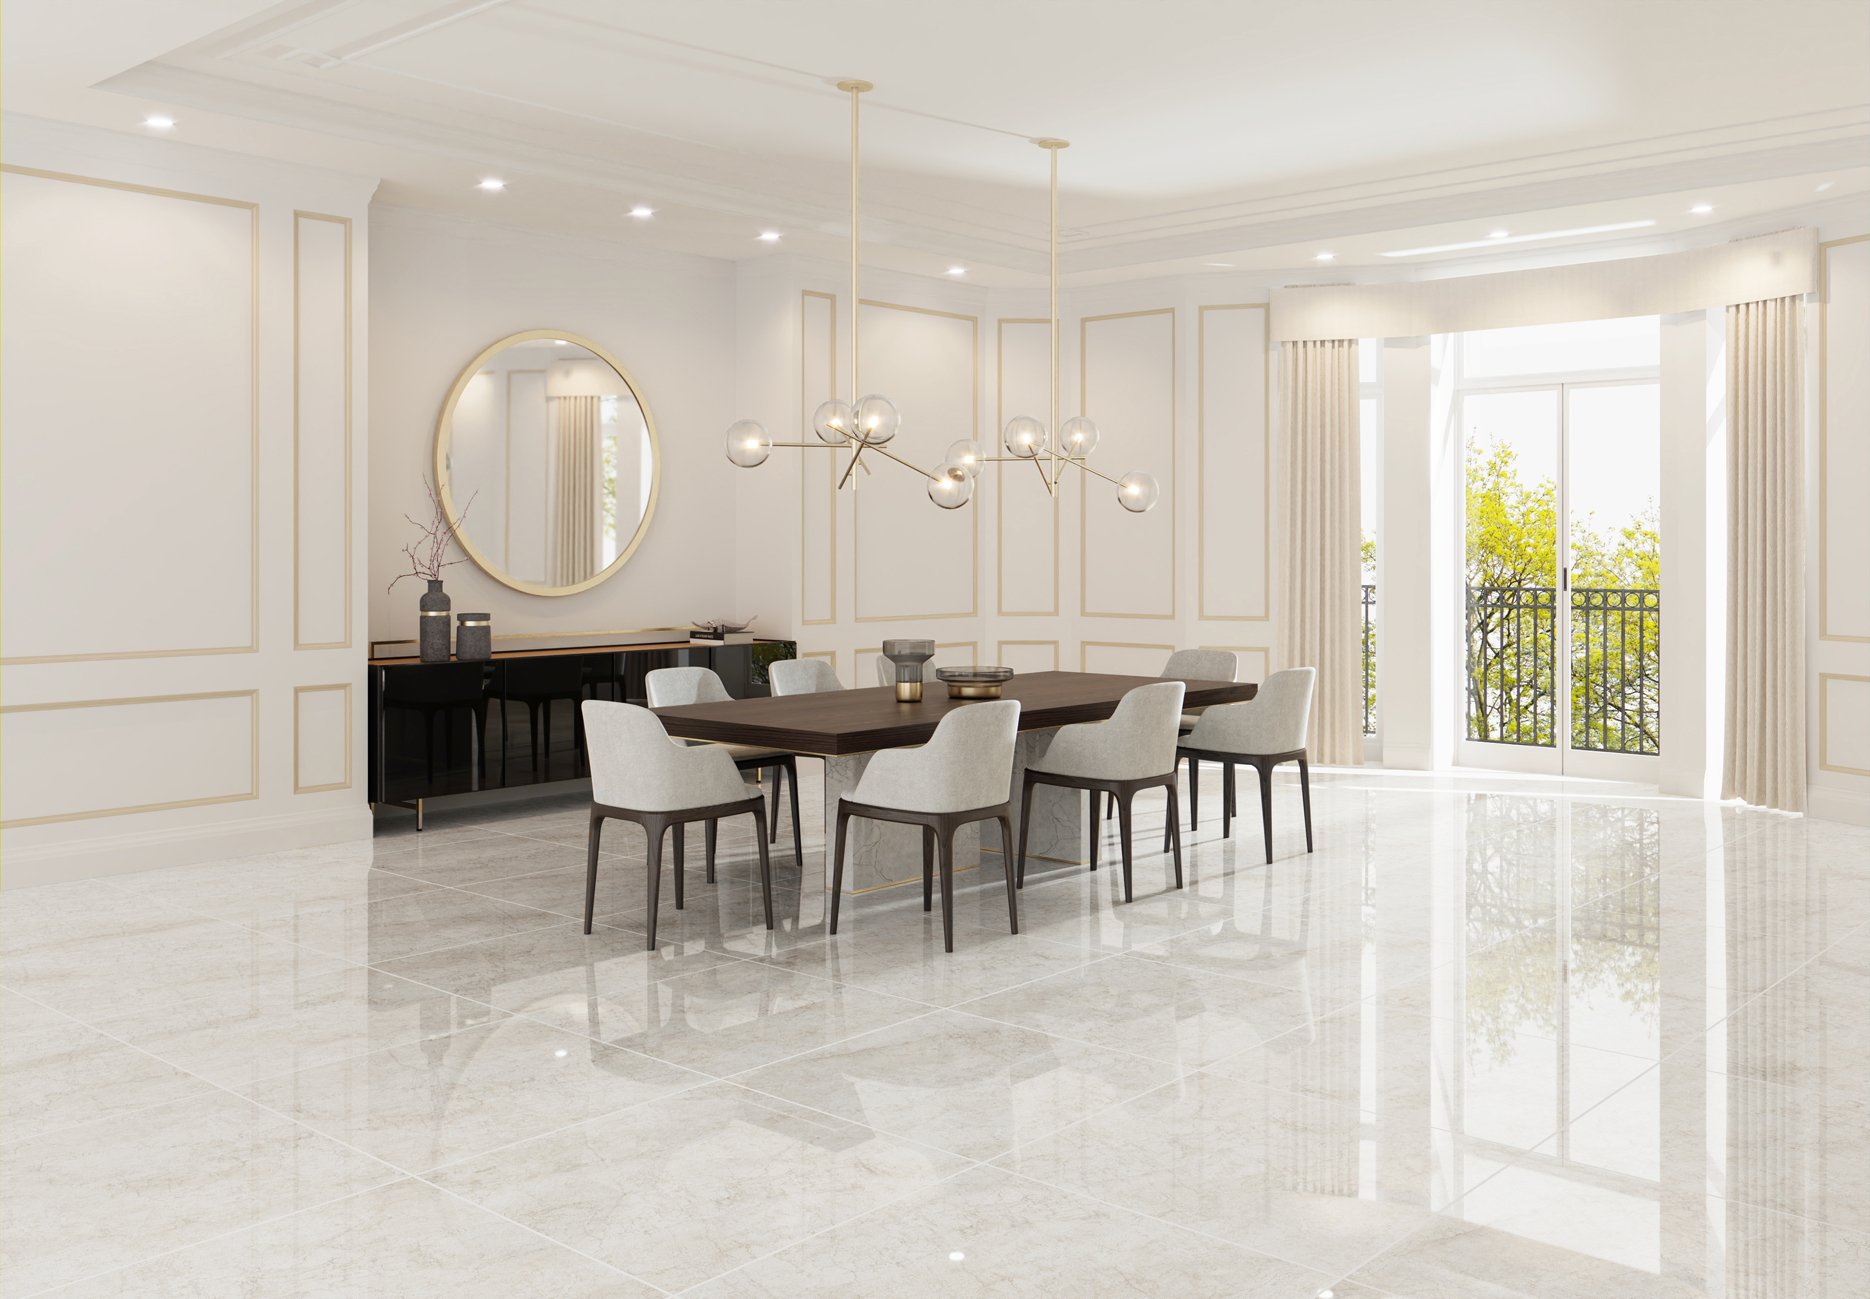 Luxury Dining Room Inspirations with Big Size Porcelain Tiles | Anabata